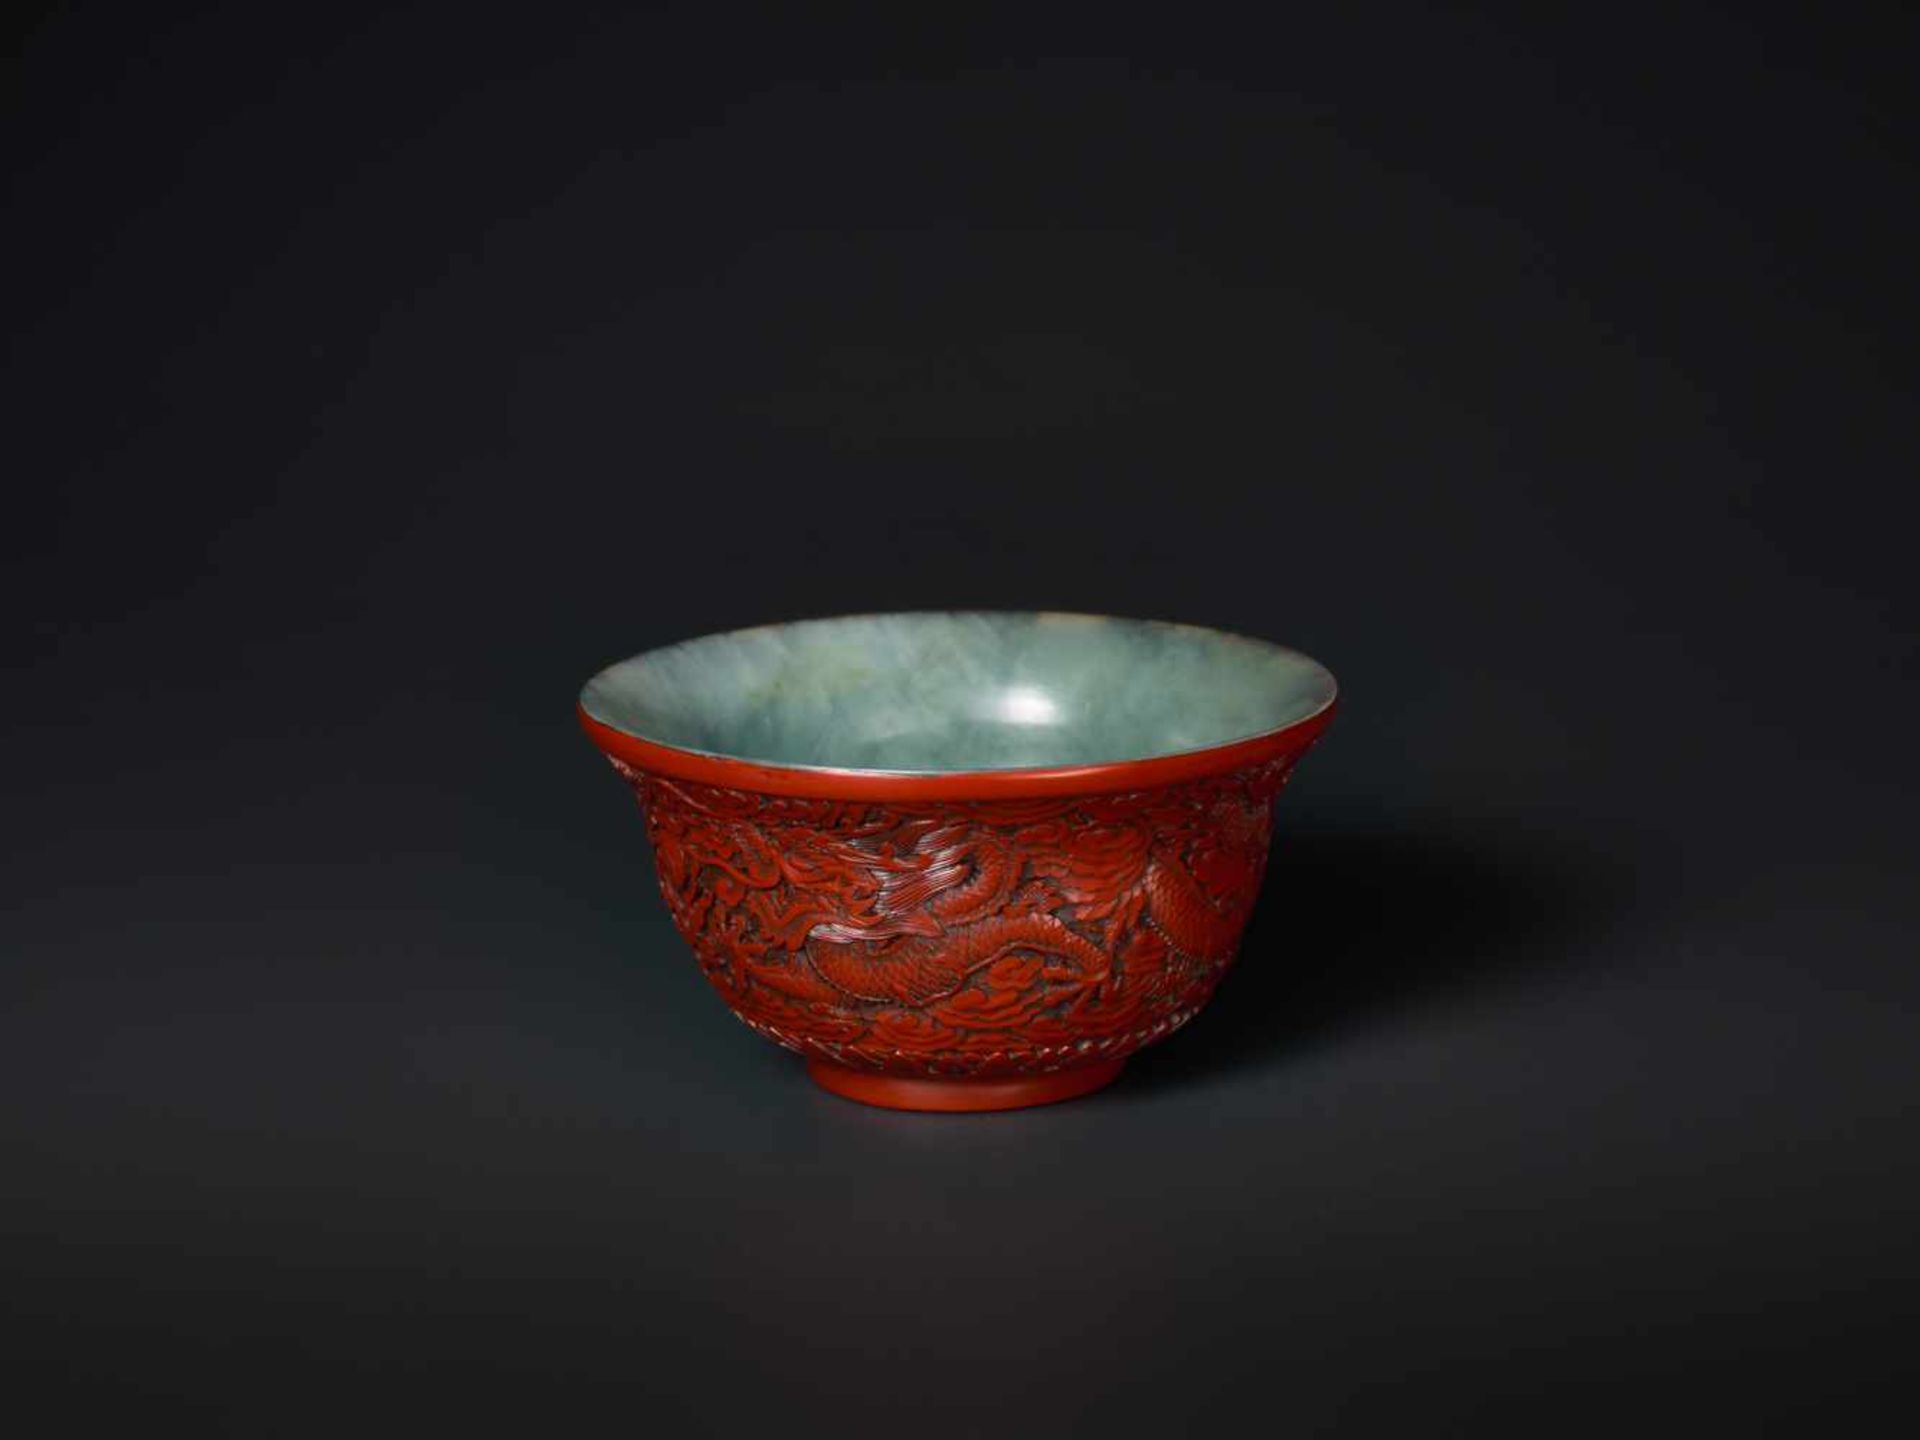 AN EXTREMELY RARE QIANLONG PERIOD CINNABAR LACQUER EMBELLISHED JADE BOWL Celadon and grey streaked - Image 4 of 7